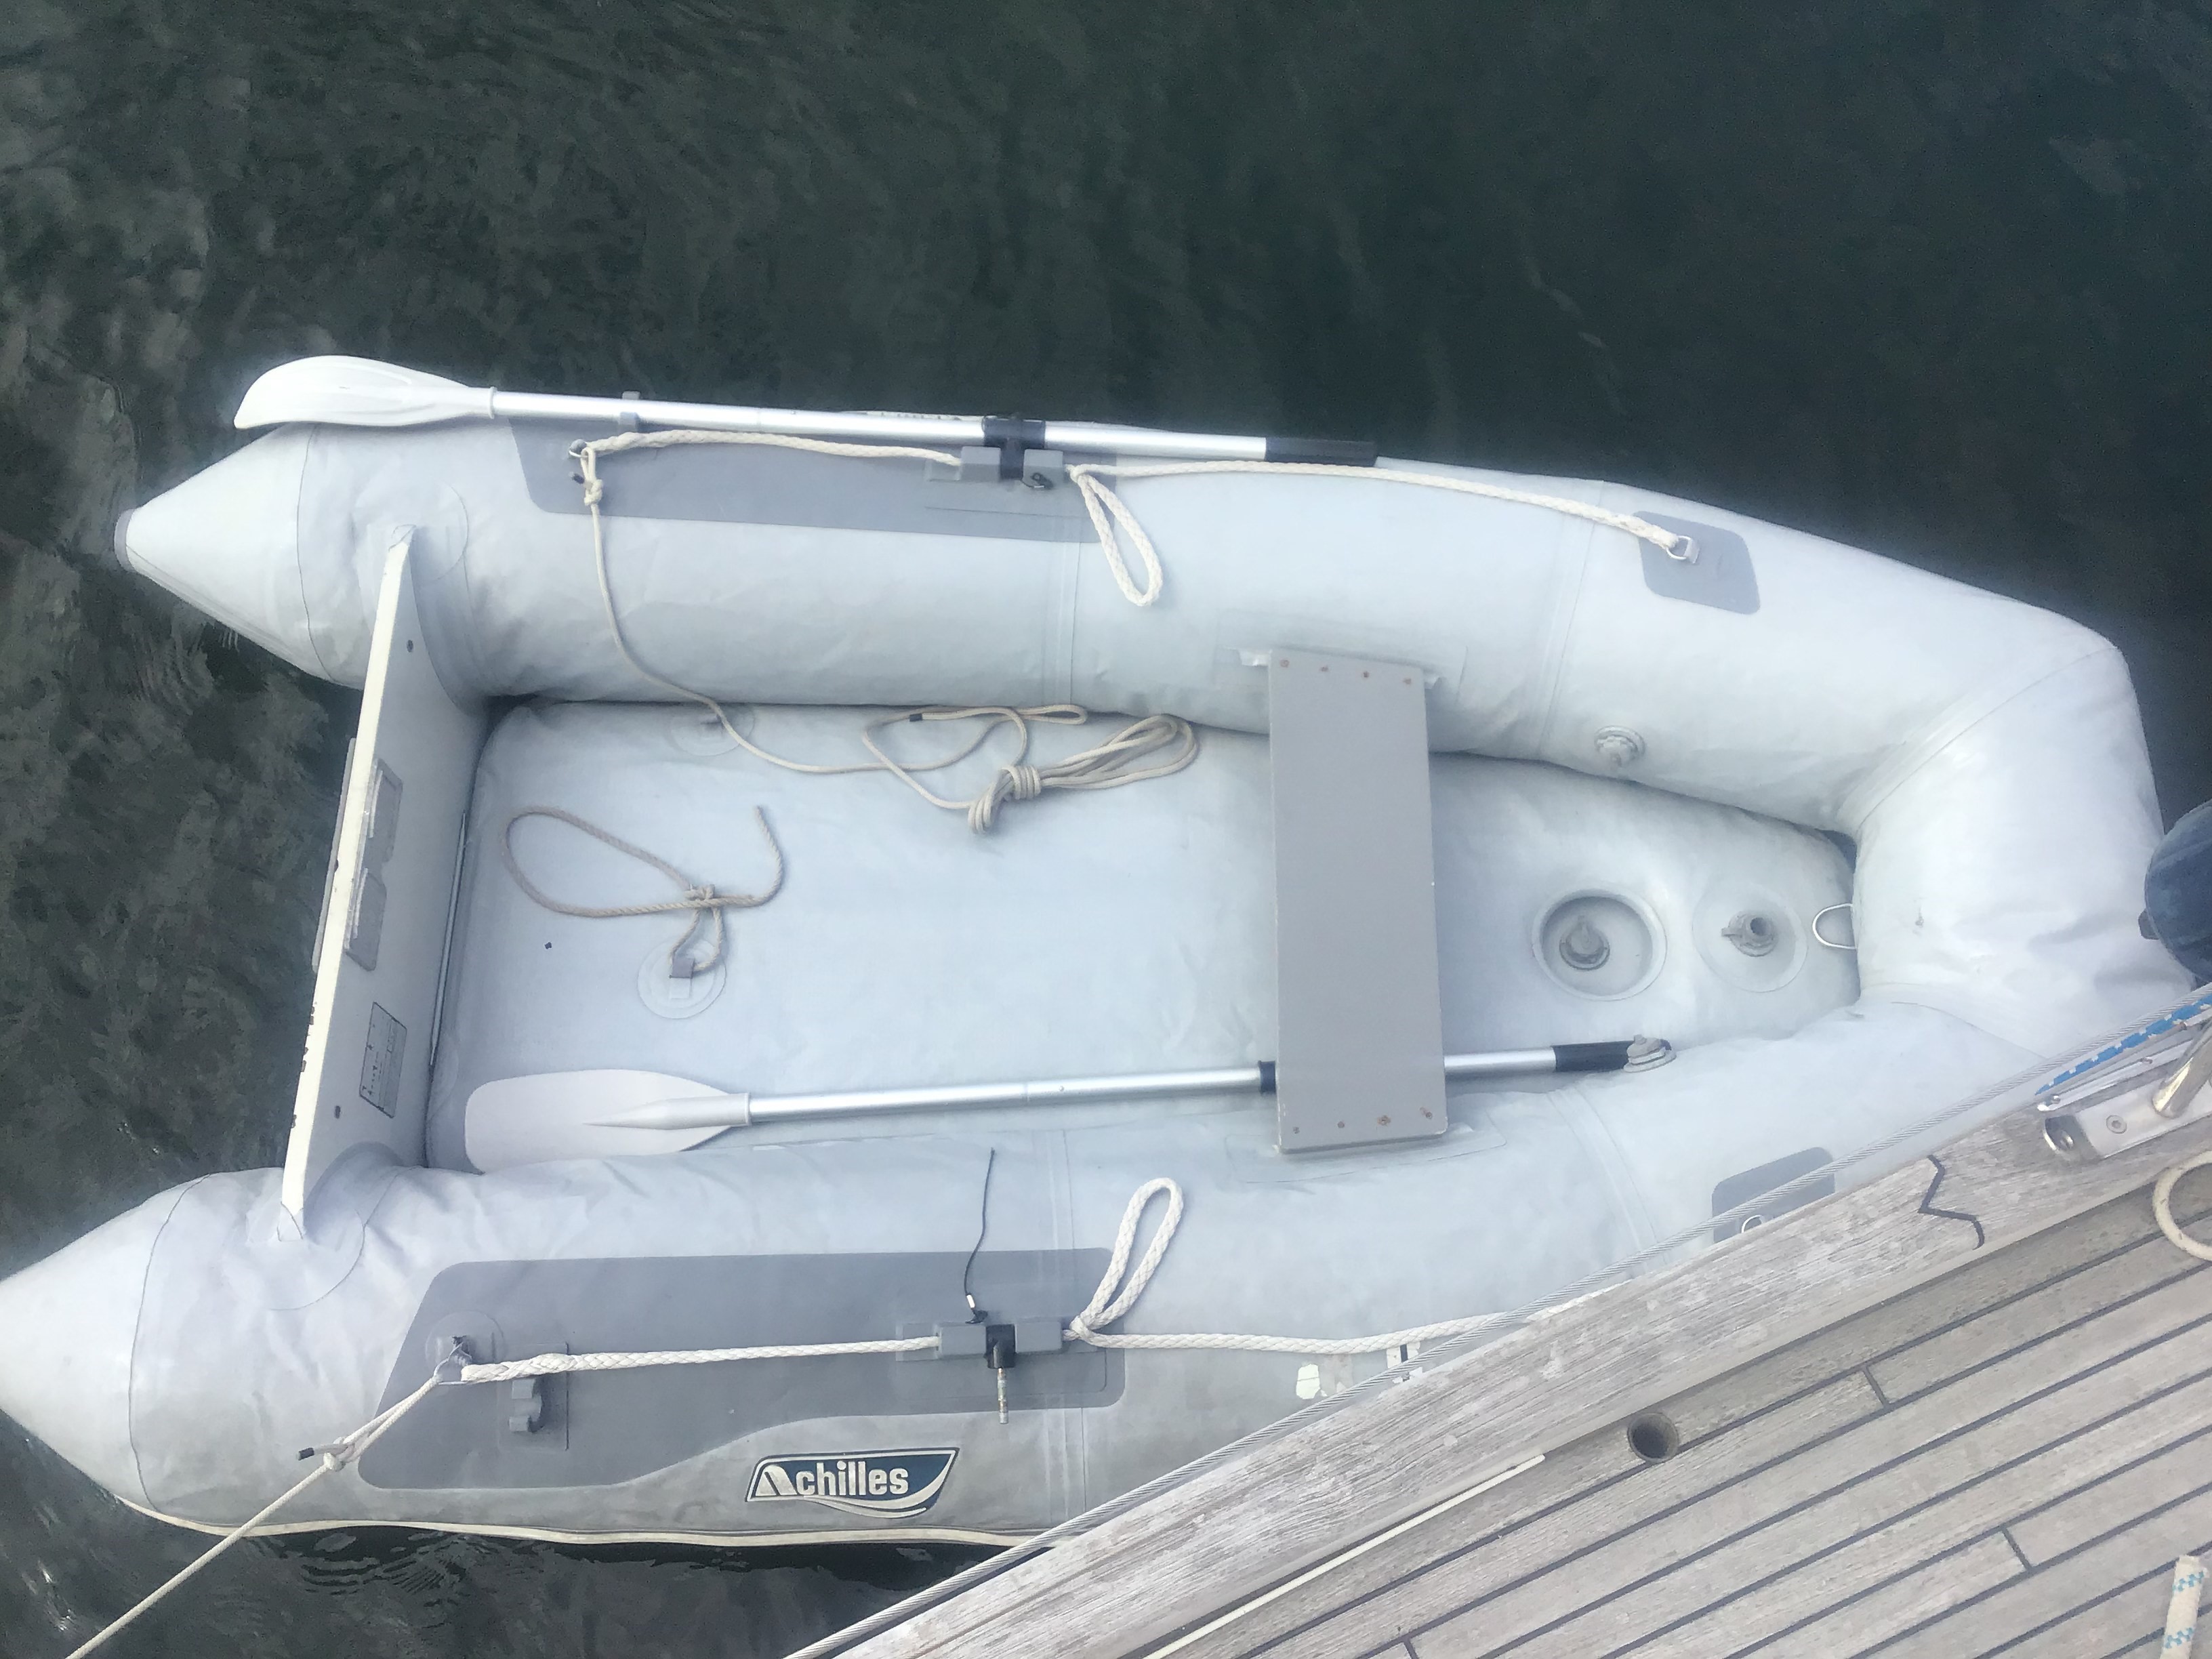 Dinghy partially deflated